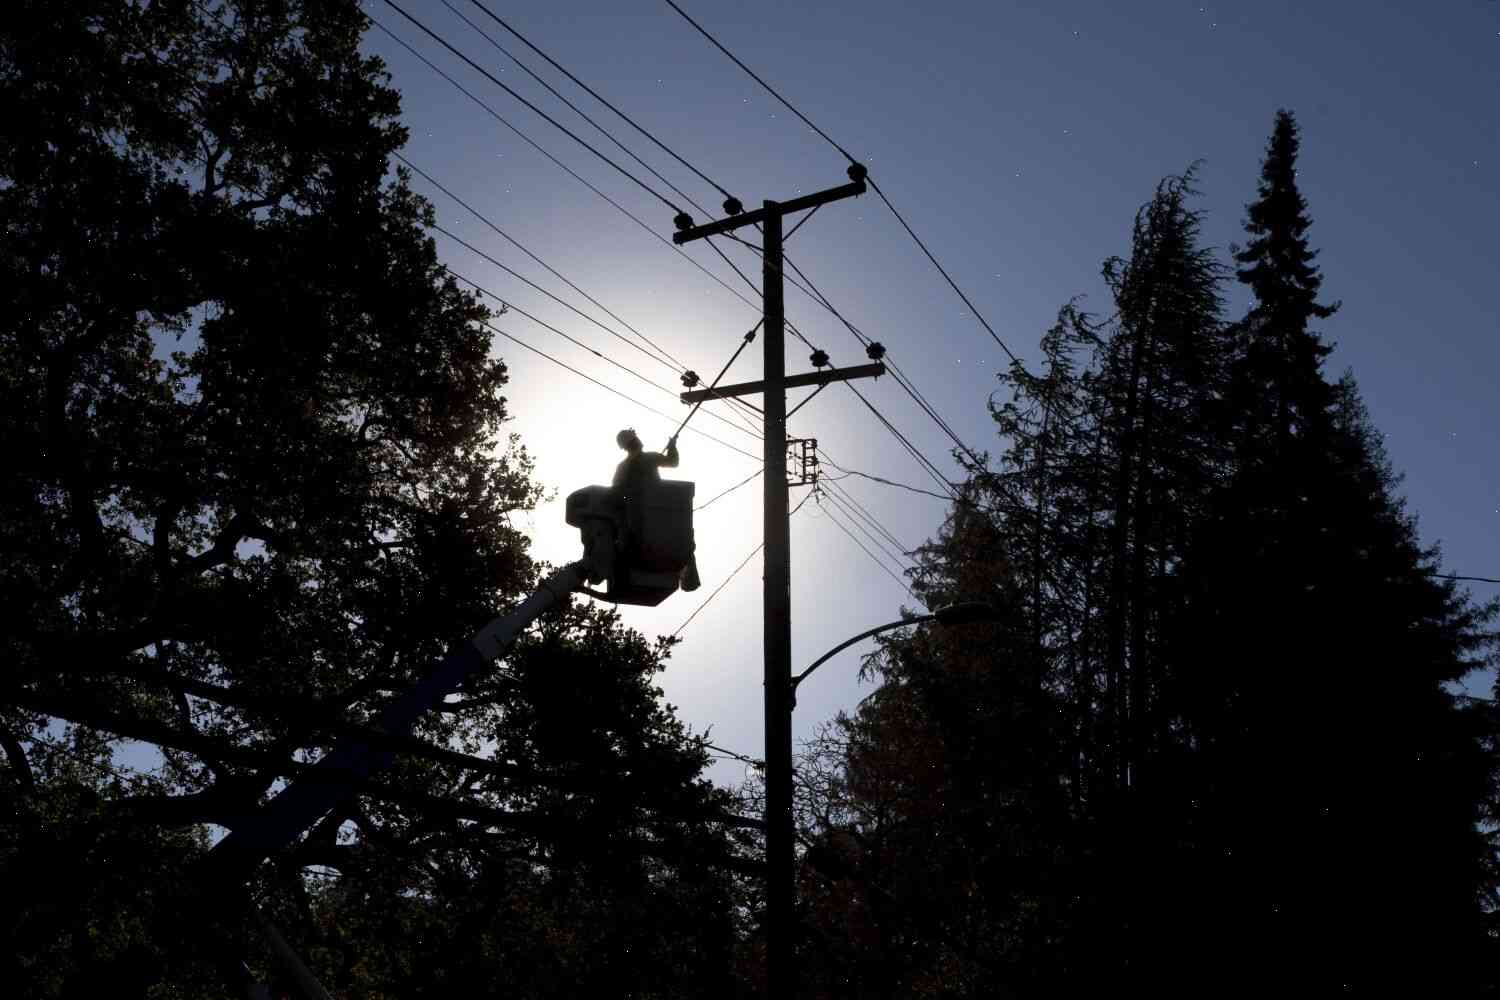 PG&E urges customers to use power before they are out of service